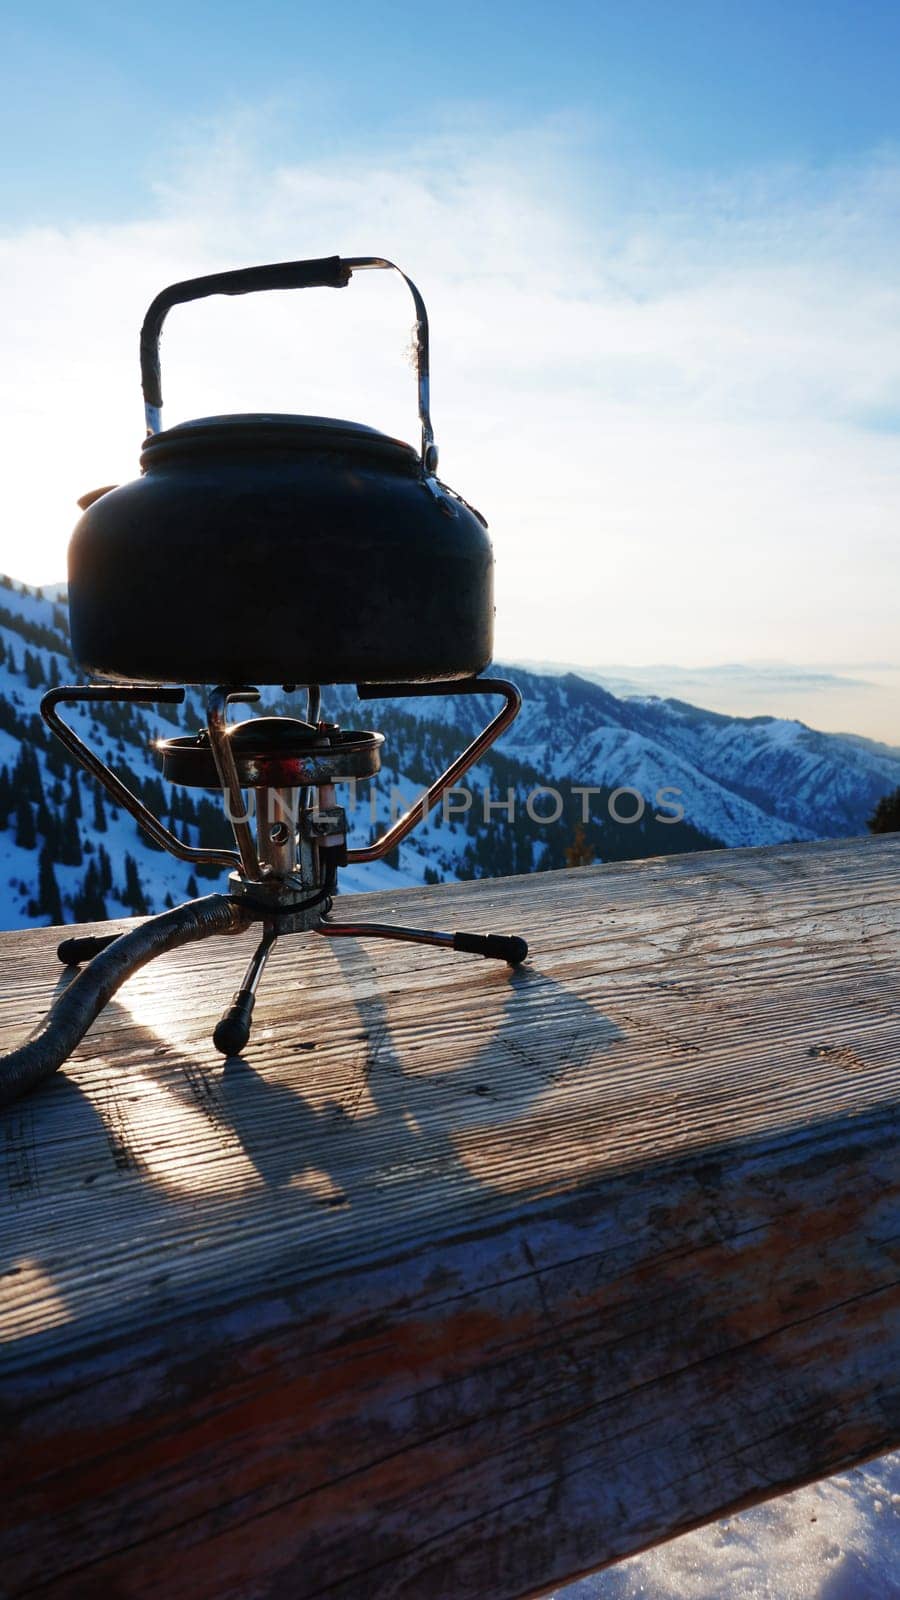 The burner is burning with a blue fire with a kettle. The burner and the cylinder are on the bench. In the background there are green fir trees, mountains in white snow and a beautiful sunset